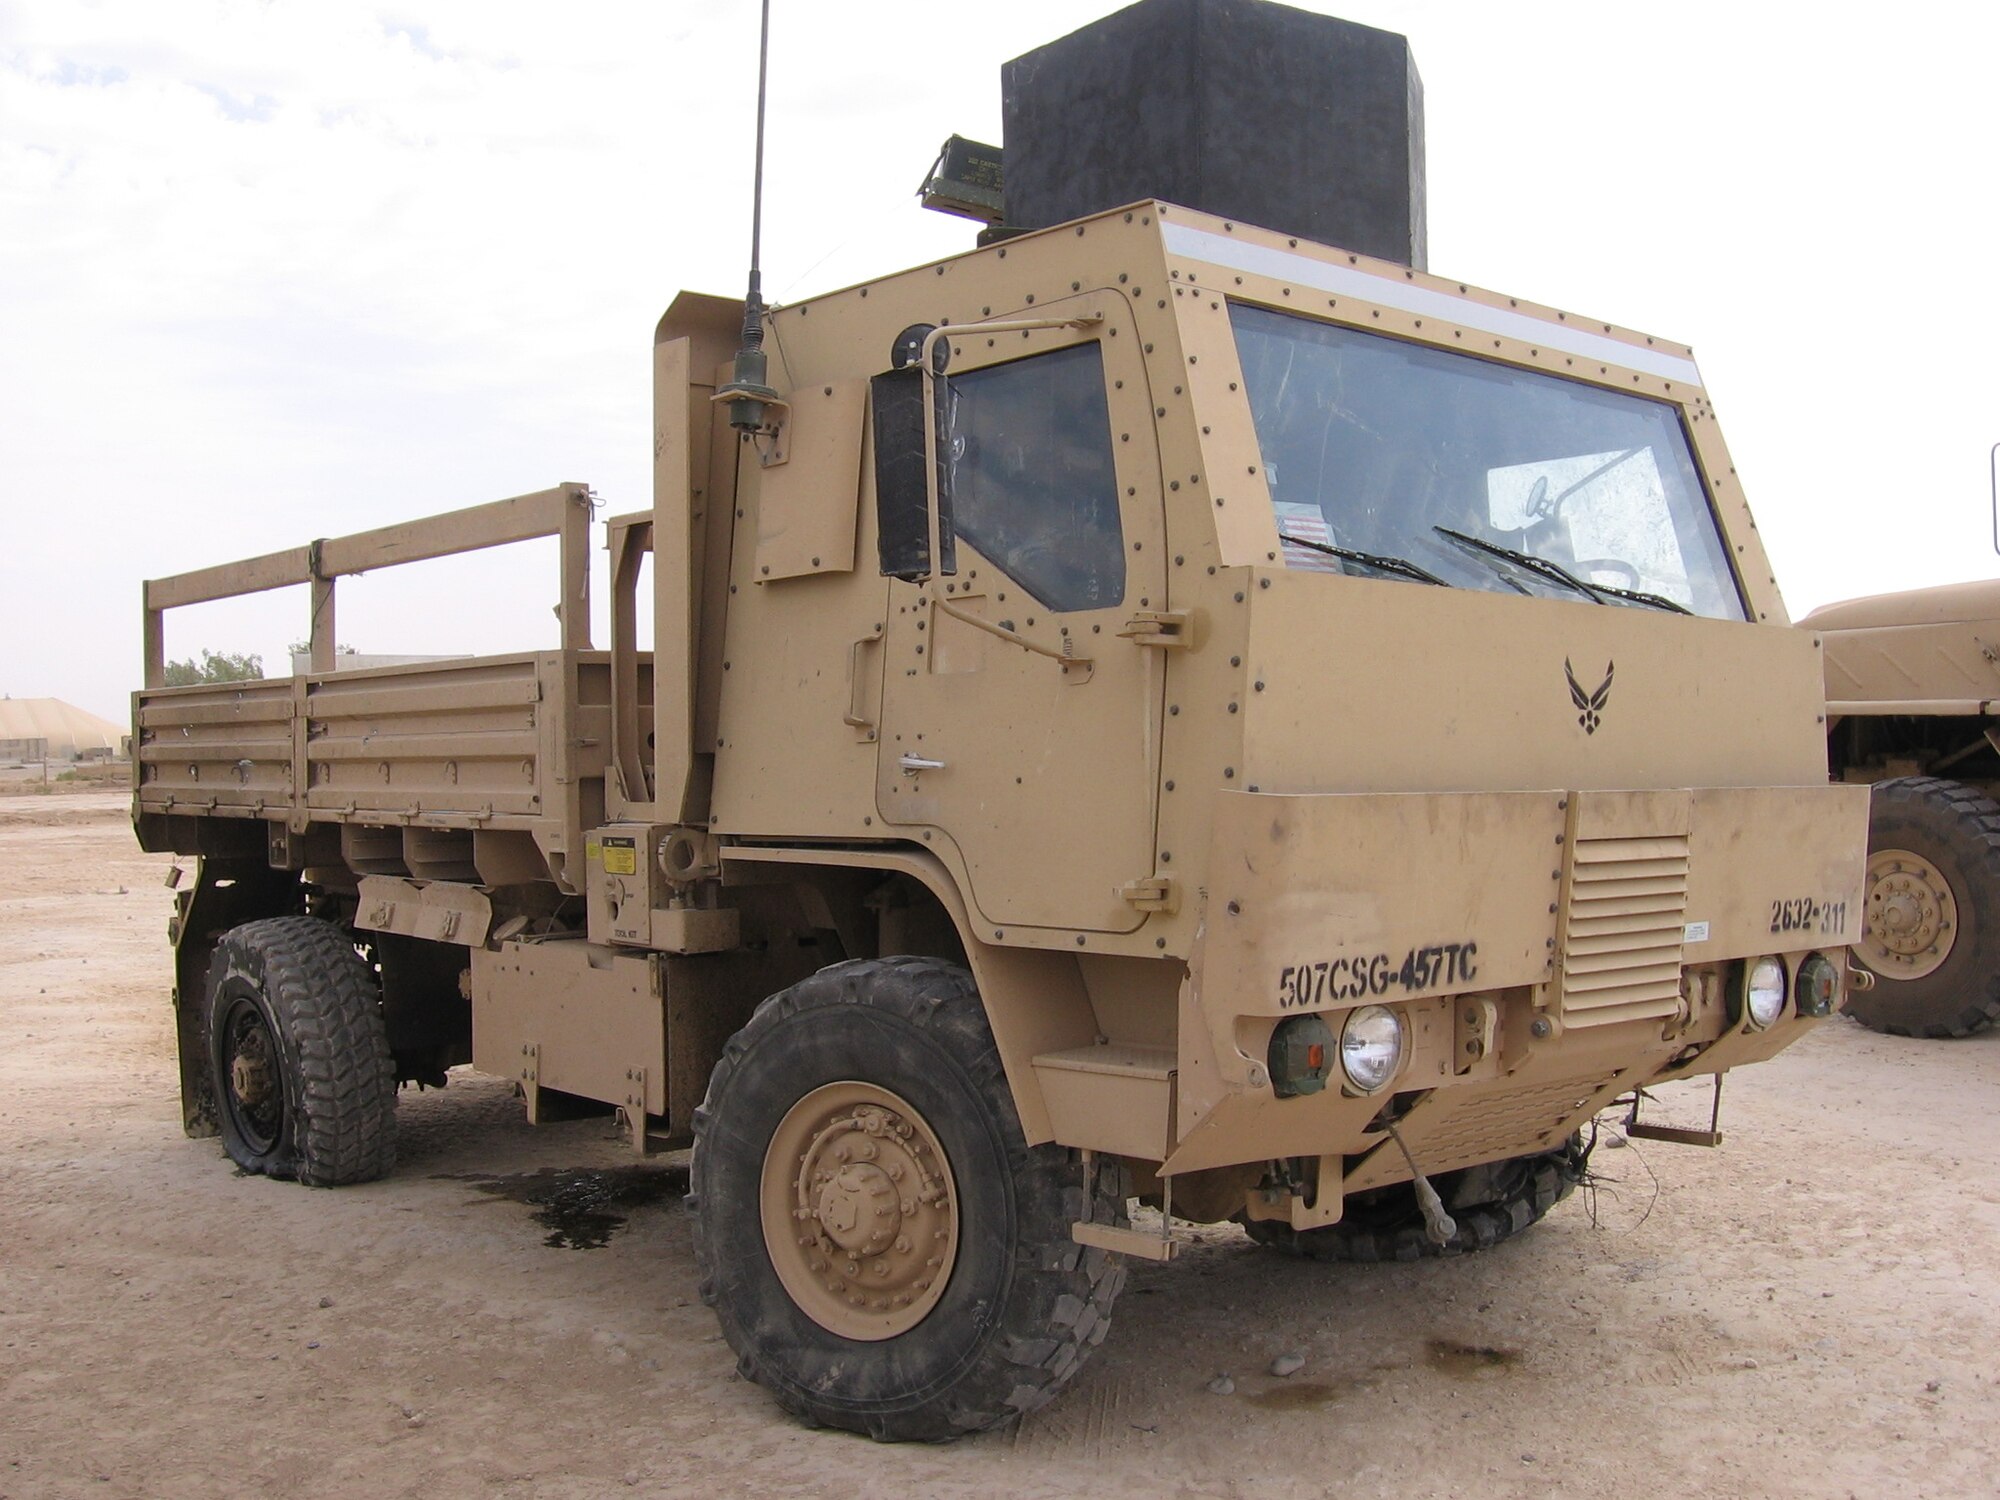 This U.S. Air Force light medium tactical vehicle sustained damage from an improvised explosive device during a deployment in Iraq, 2005. Staff Sgt. Jimmy Boulware, at the time an Airman 1st Class, rode as truck commander in this LMTV when the IED went off as he rode past. (courtesy photo)  